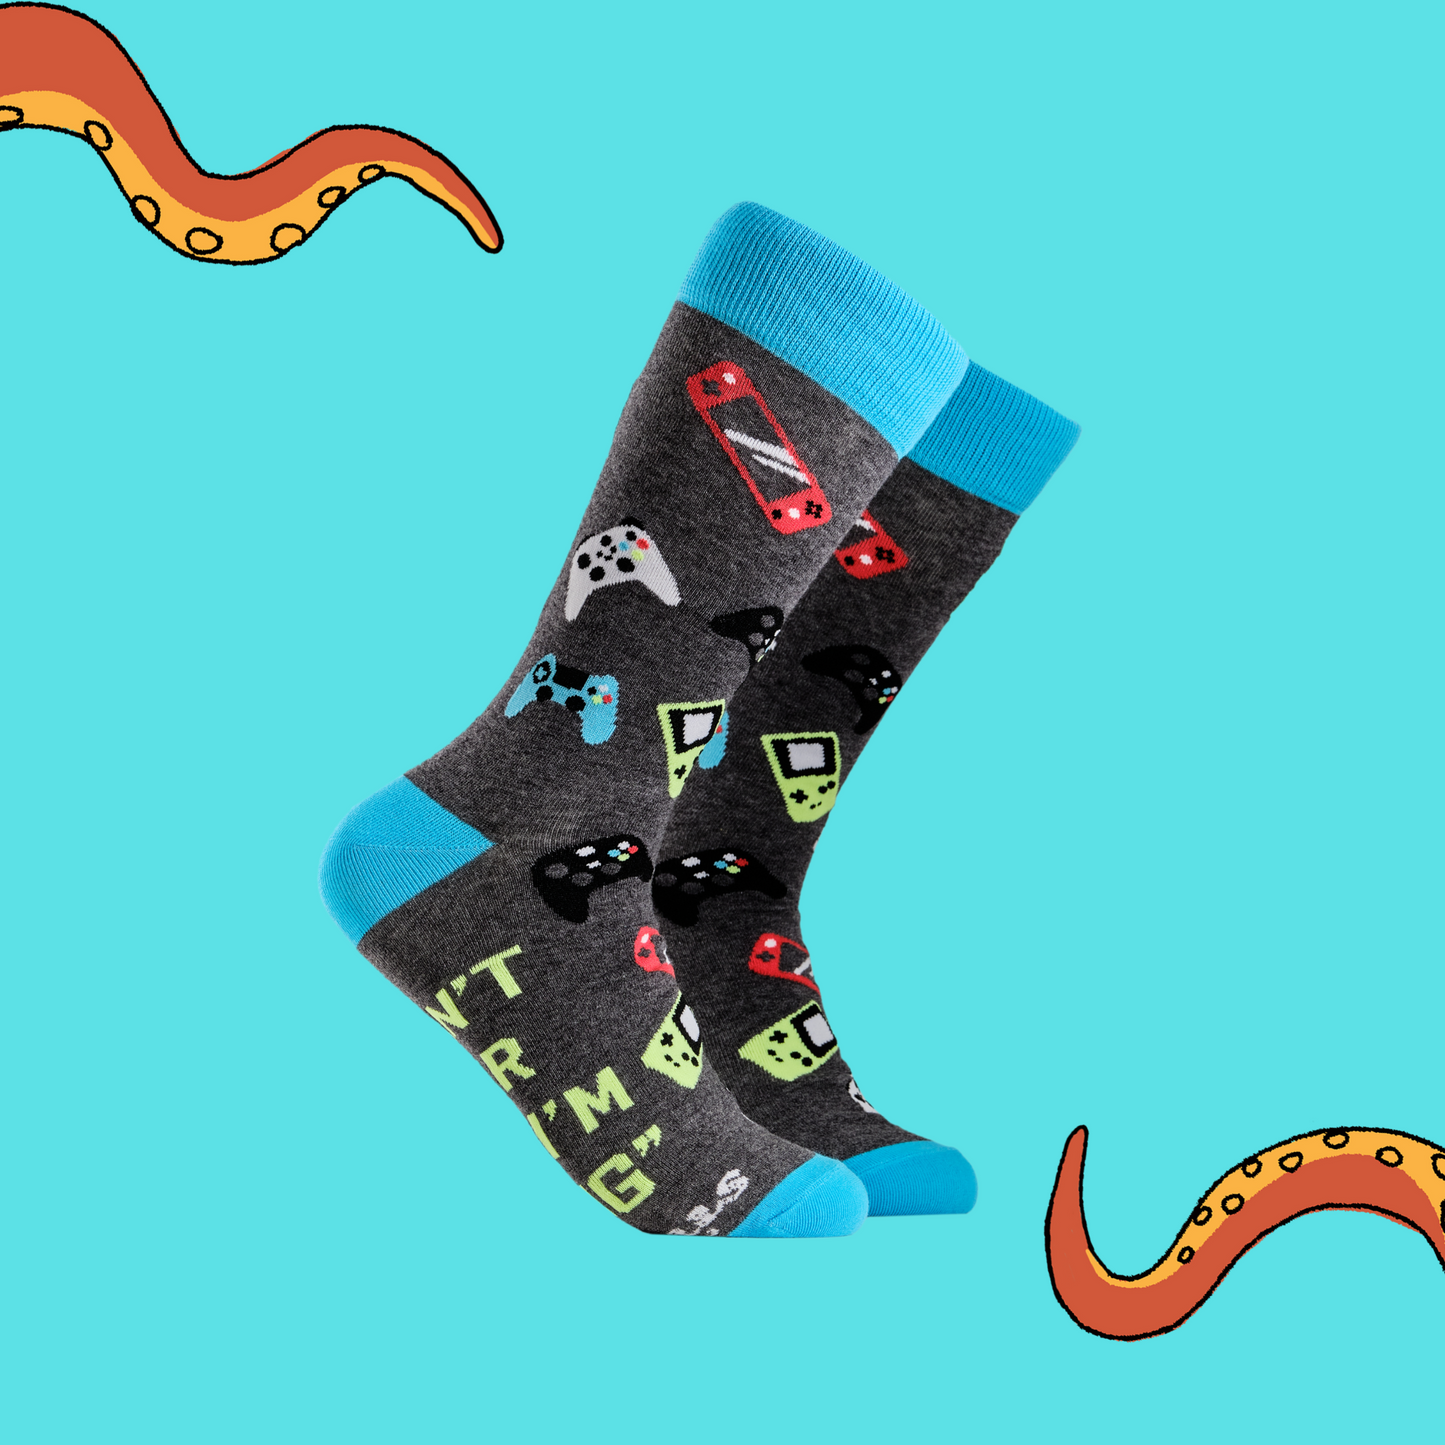 A pair of socks depicting game controllers and consoles. Grey legs, blue cuff, heel and toe.